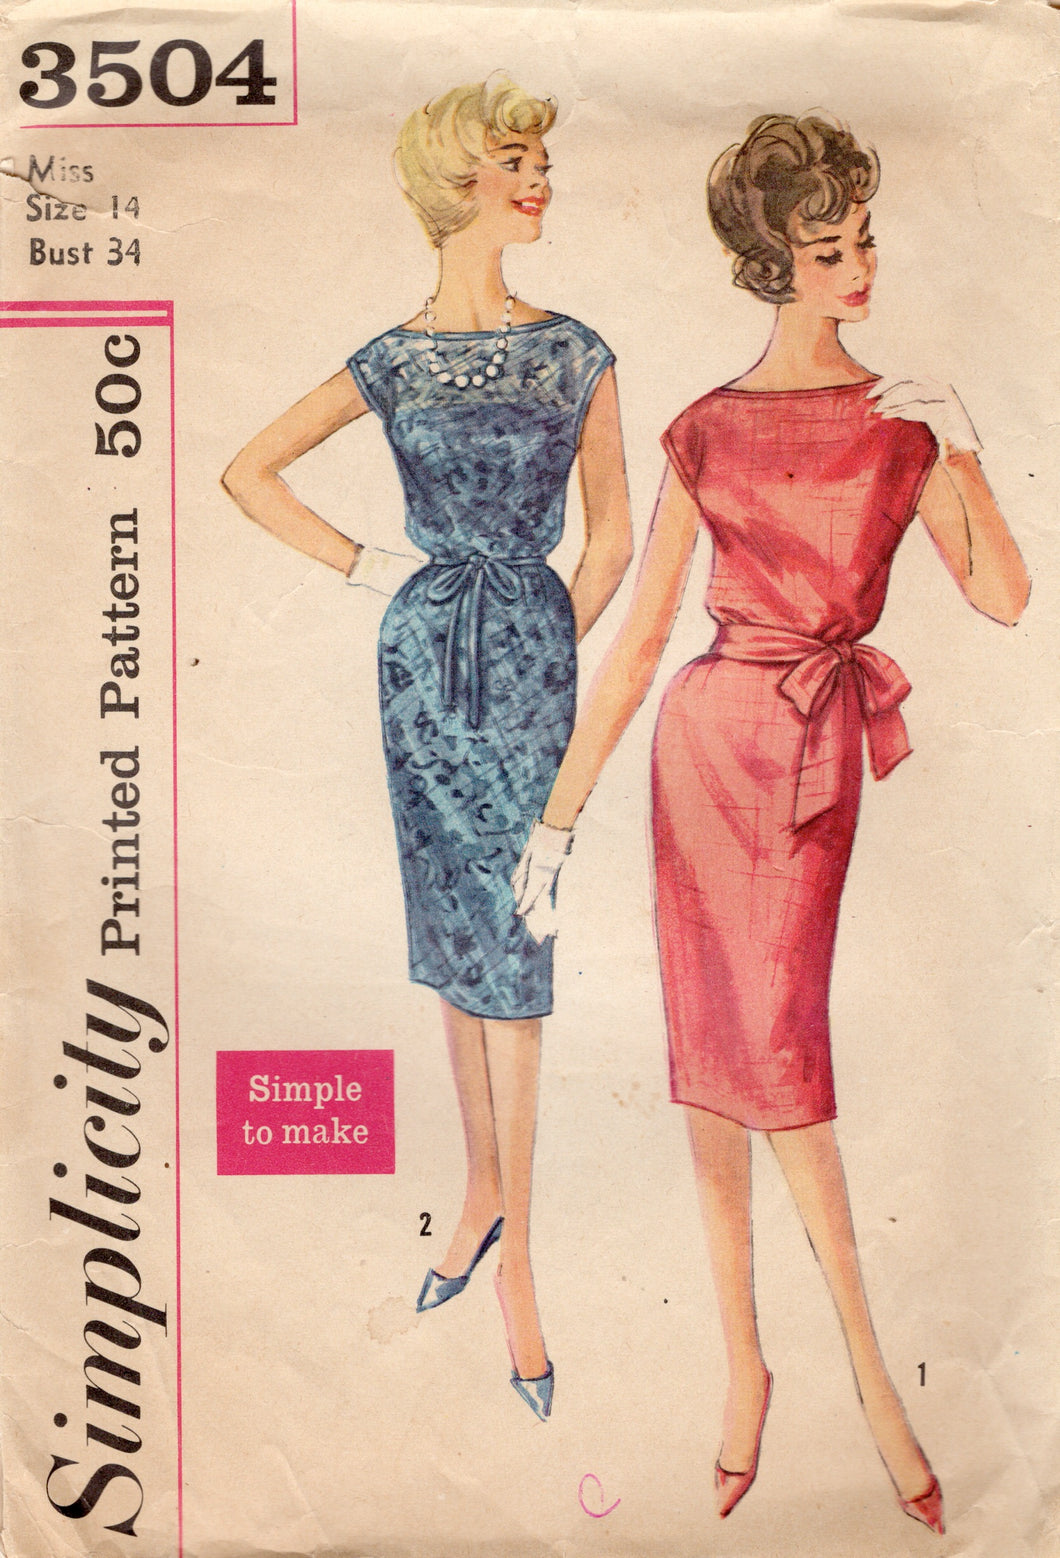 1960's Simplicity Sheath Dress with Blousy Top and Bow Accent - Bust 34